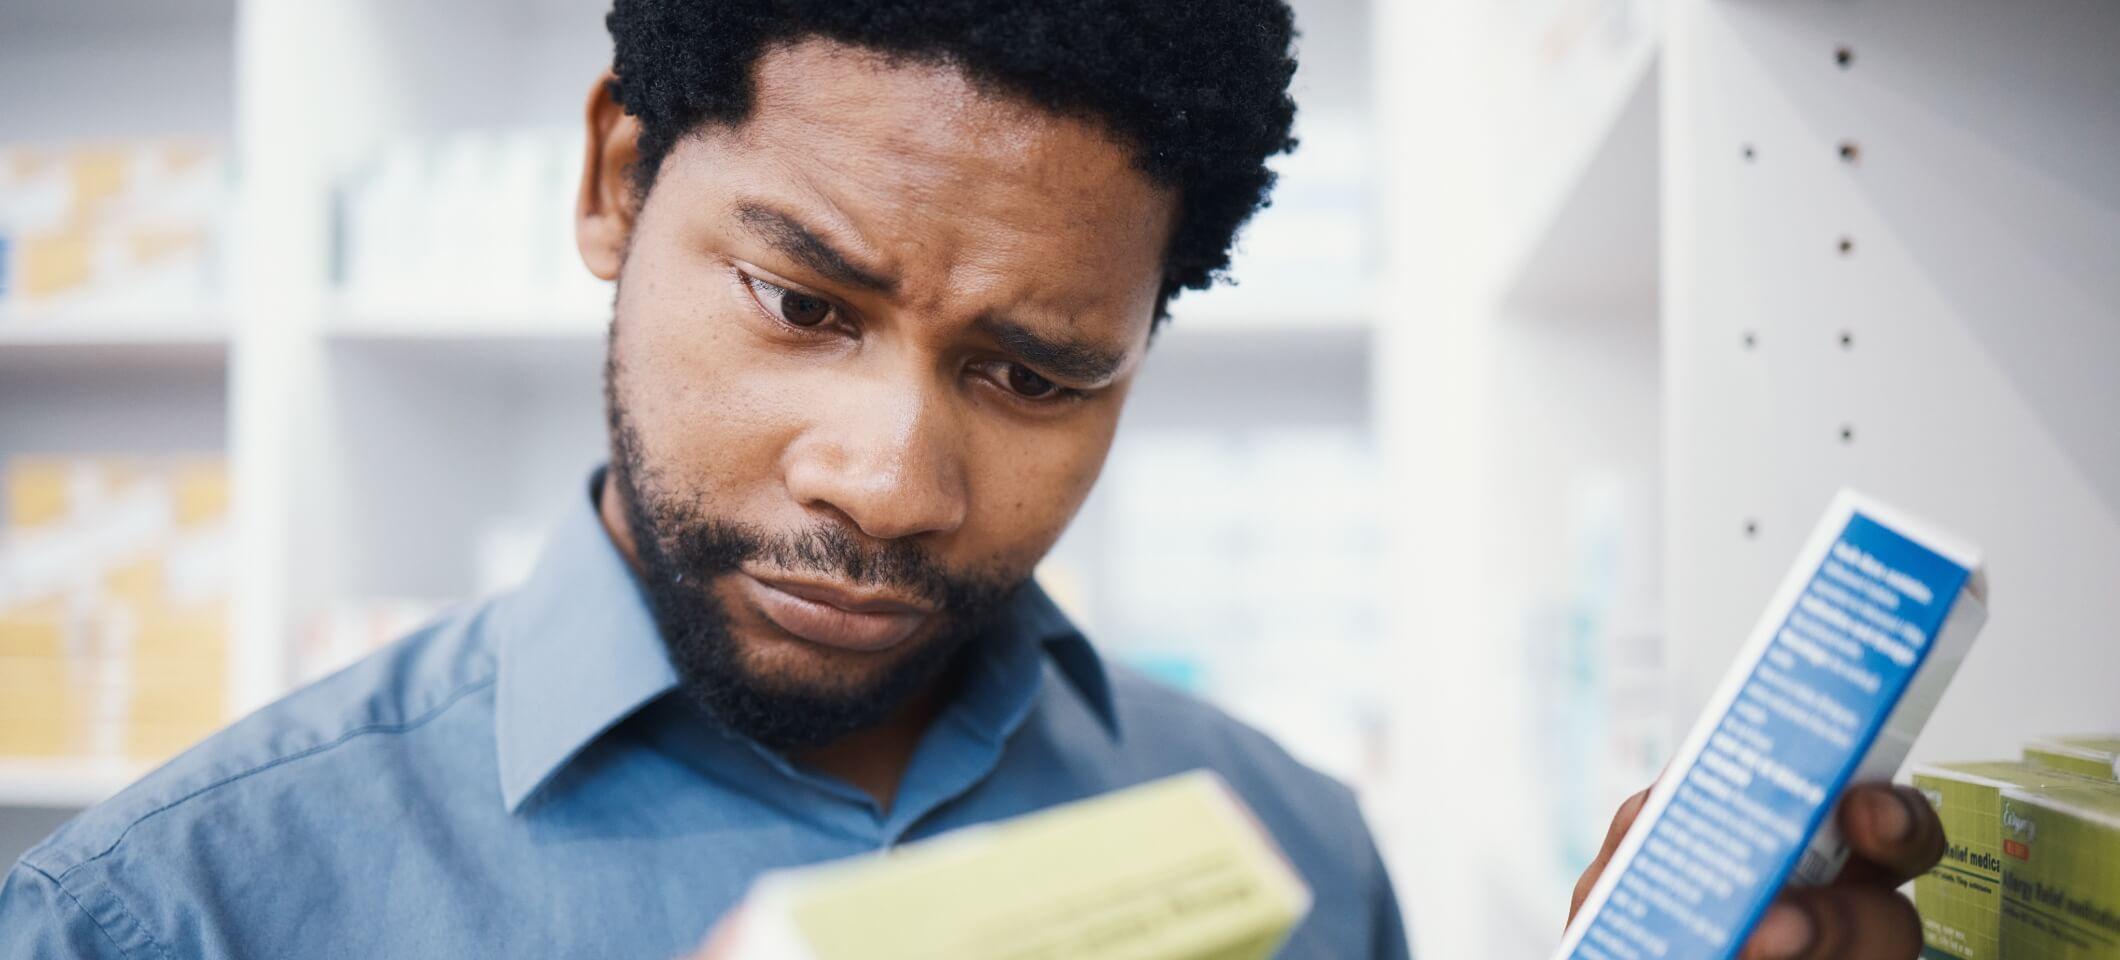 person looking at boxes of medicine looking confused